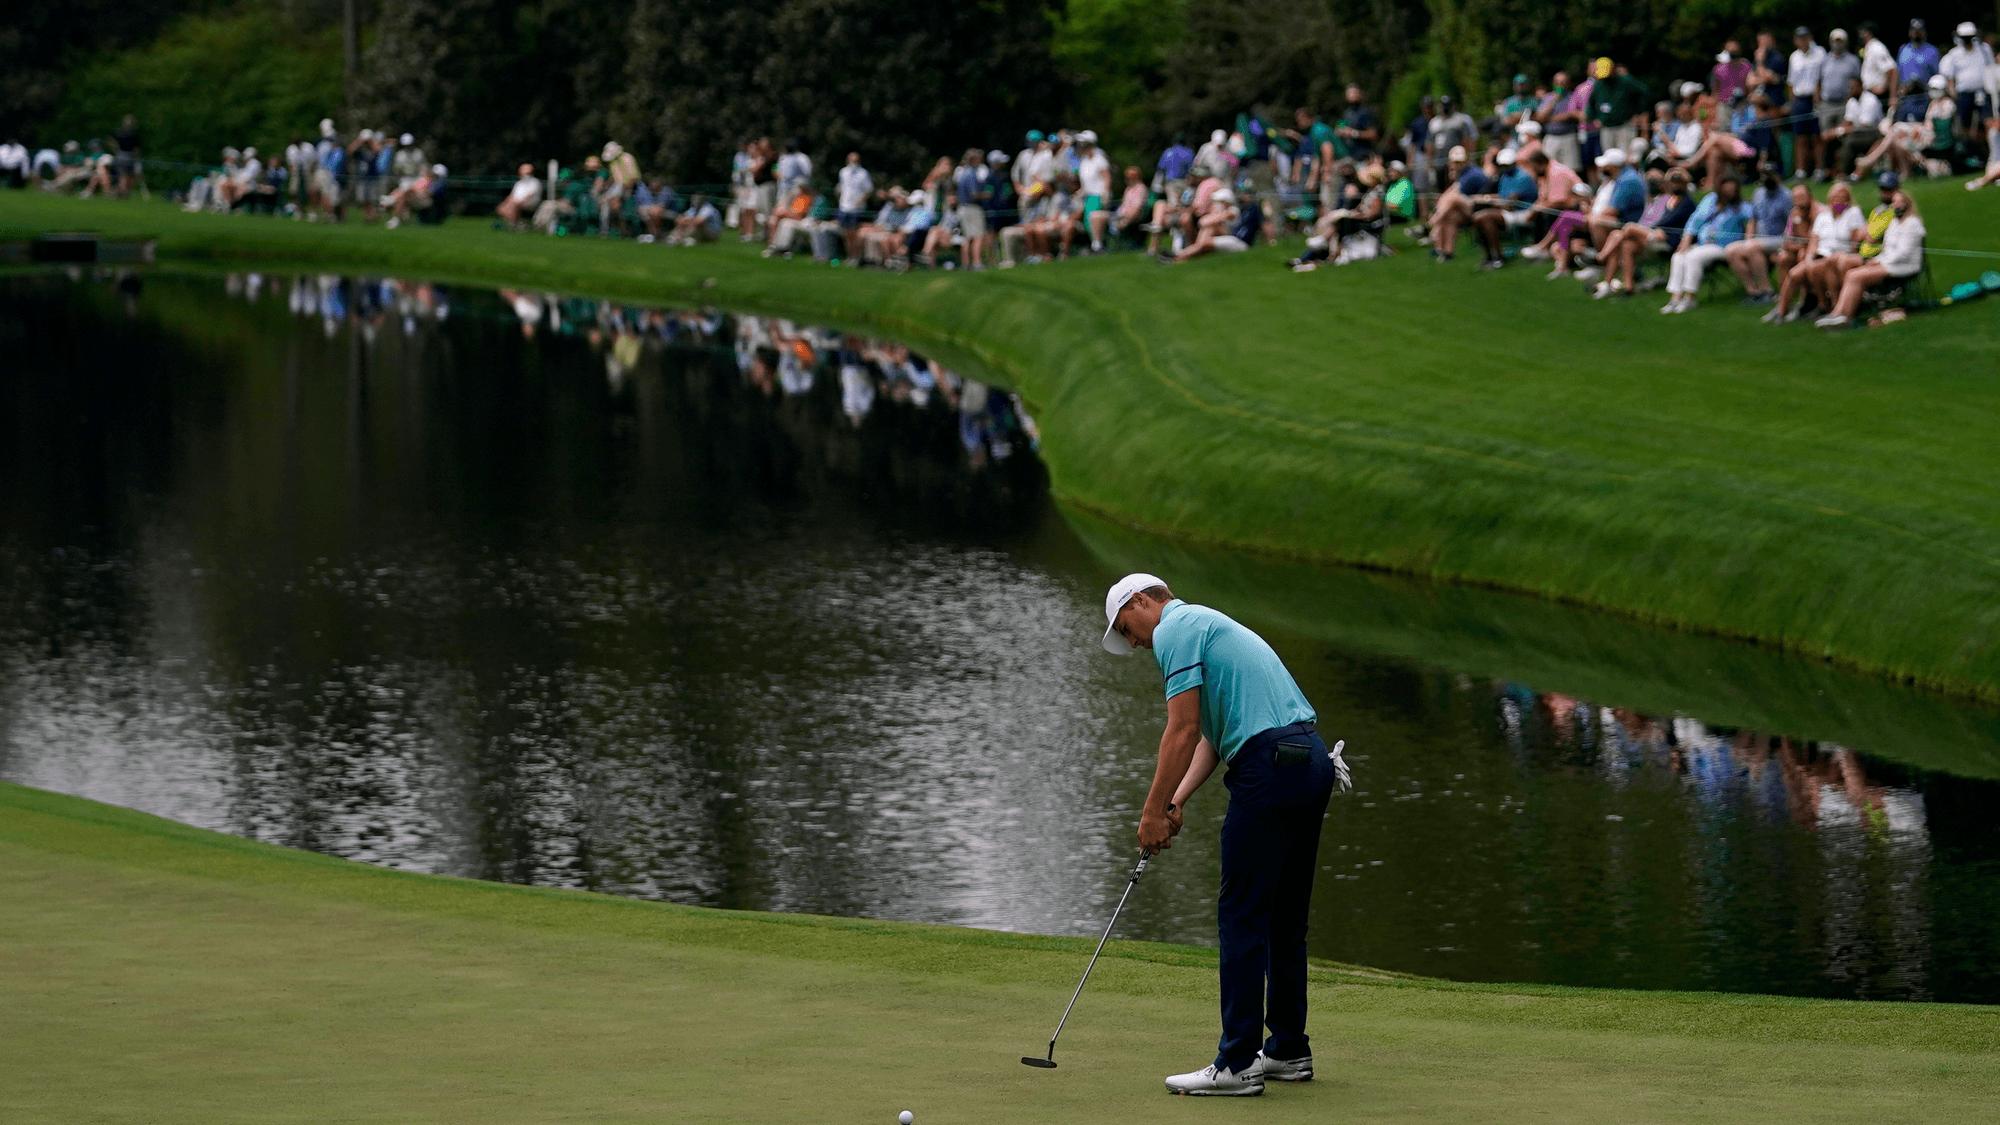 Jordan Spieth putts on the 16th green during the second round of the Masters golf tournament on Friday, April 9, 2021, in Augusta, Ga. (AP Photo/Matt Slocum)